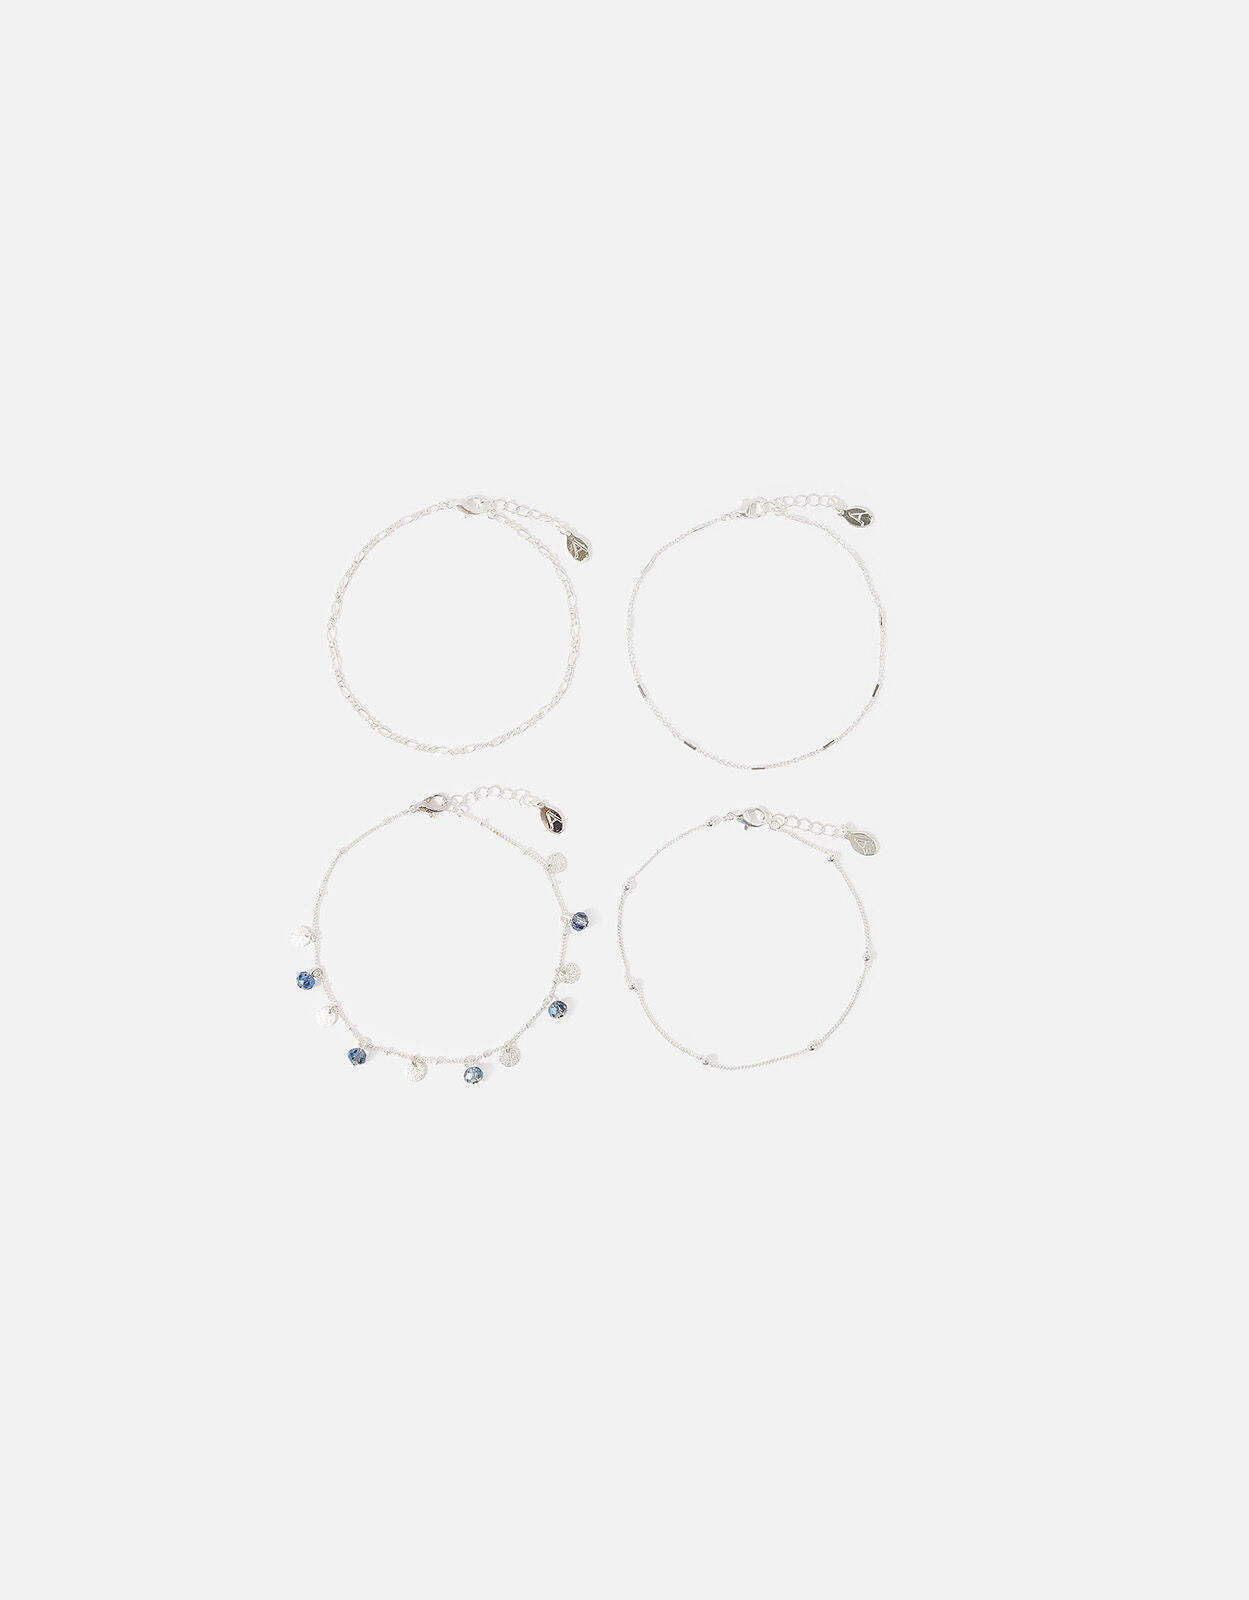 Accessorize ACCESSORIZE 4 x PACK ANKLETS CIRCLE & MIXED CHAIN IN SILVER TONE 